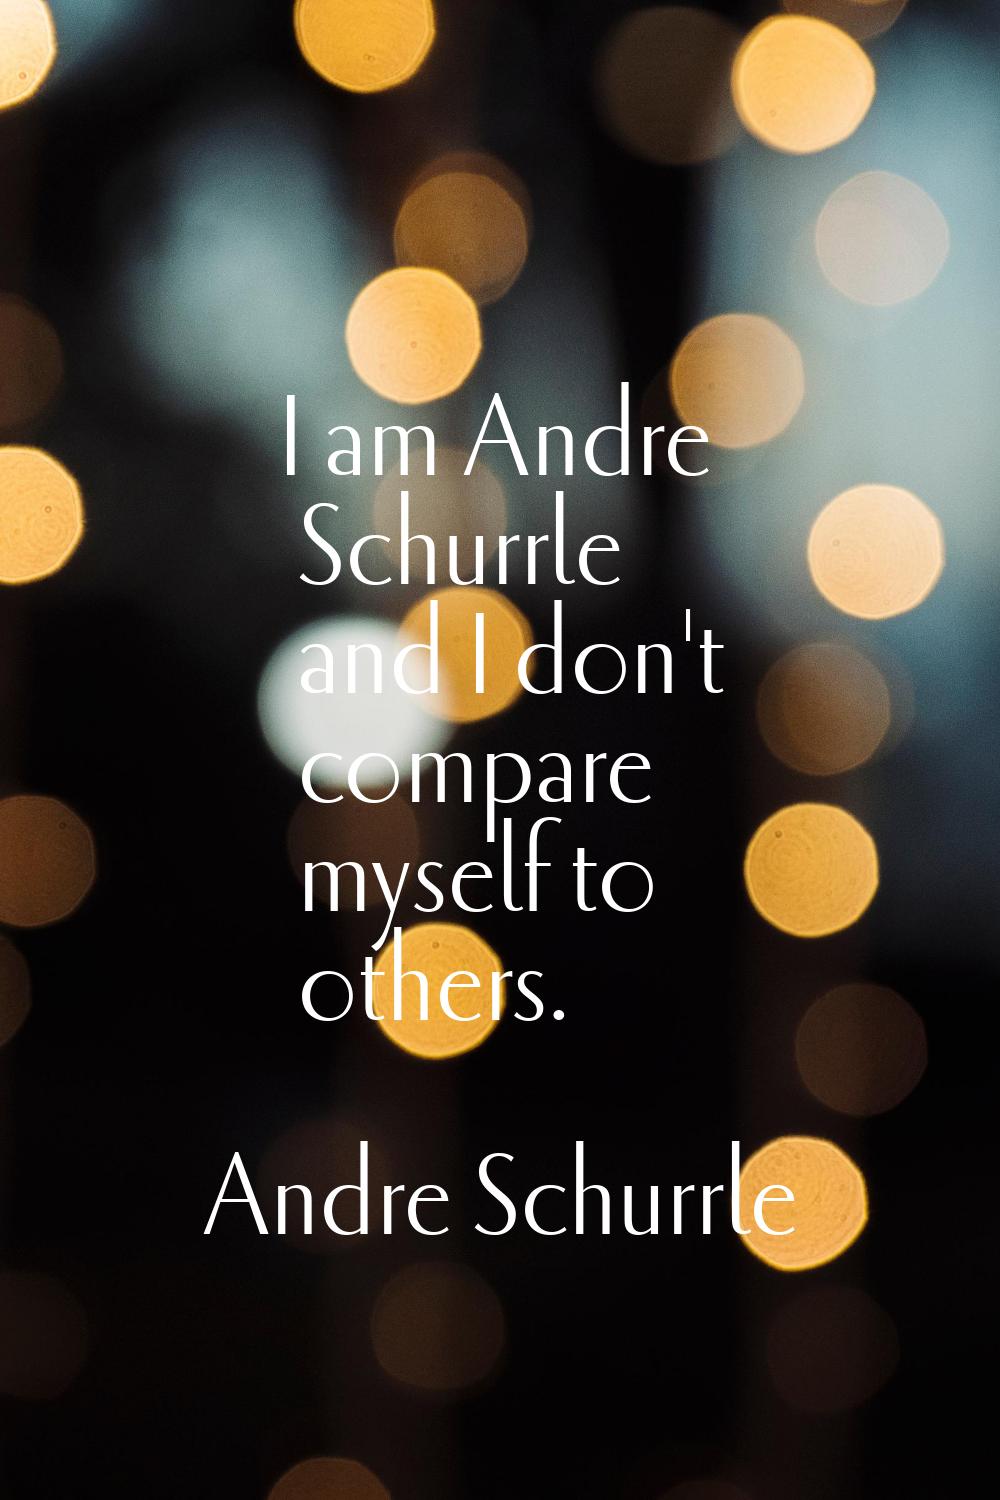 I am Andre Schurrle and I don't compare myself to others.